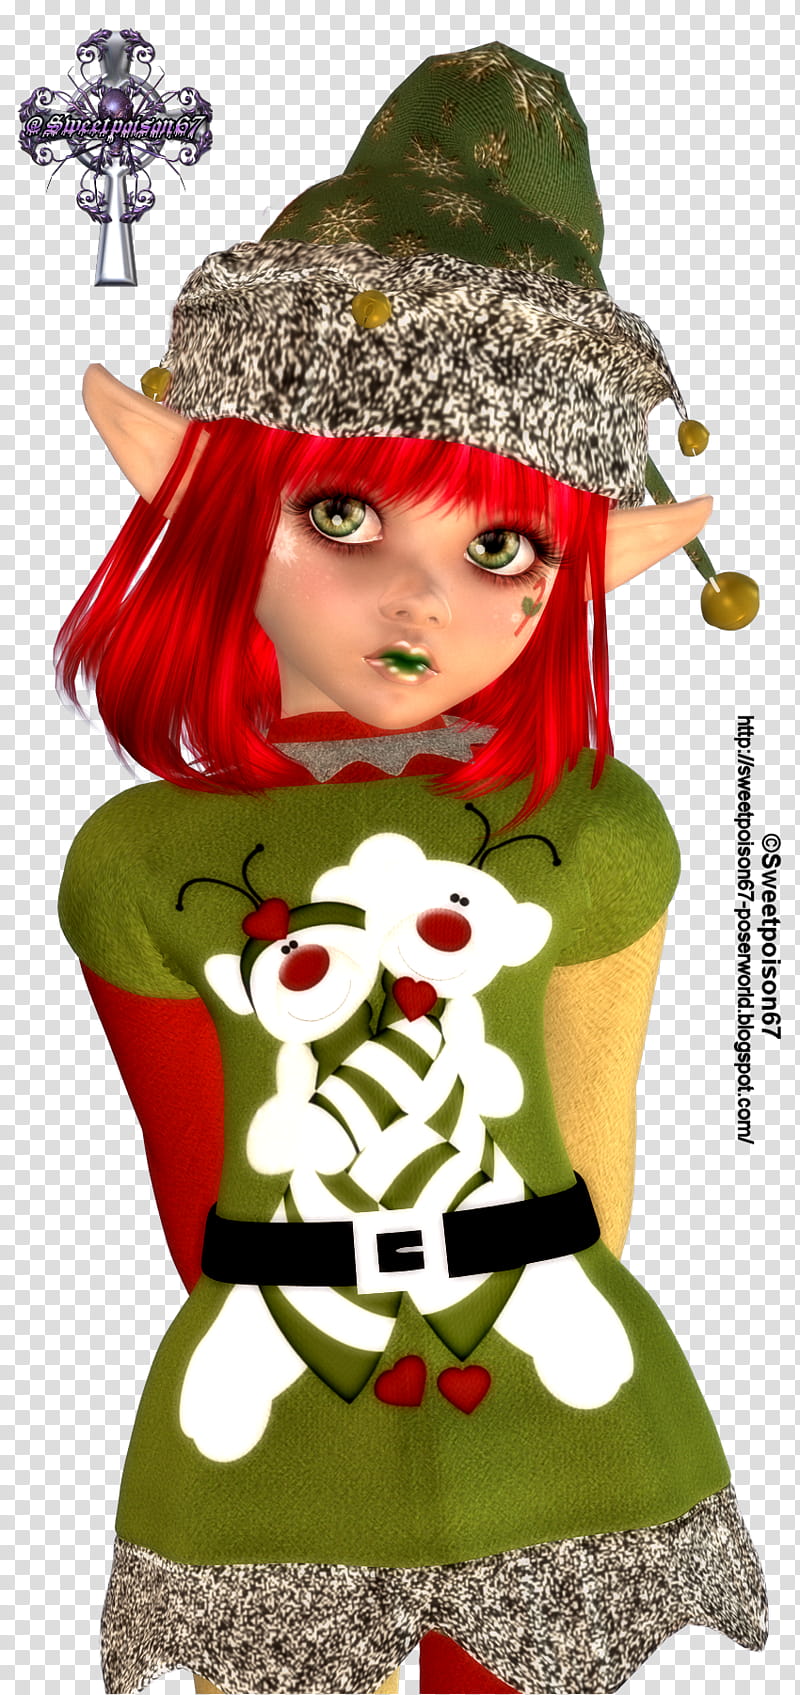 Candy Cane Elf, girl wearing green cap-sleeved shirt and green hat transparent background PNG clipart